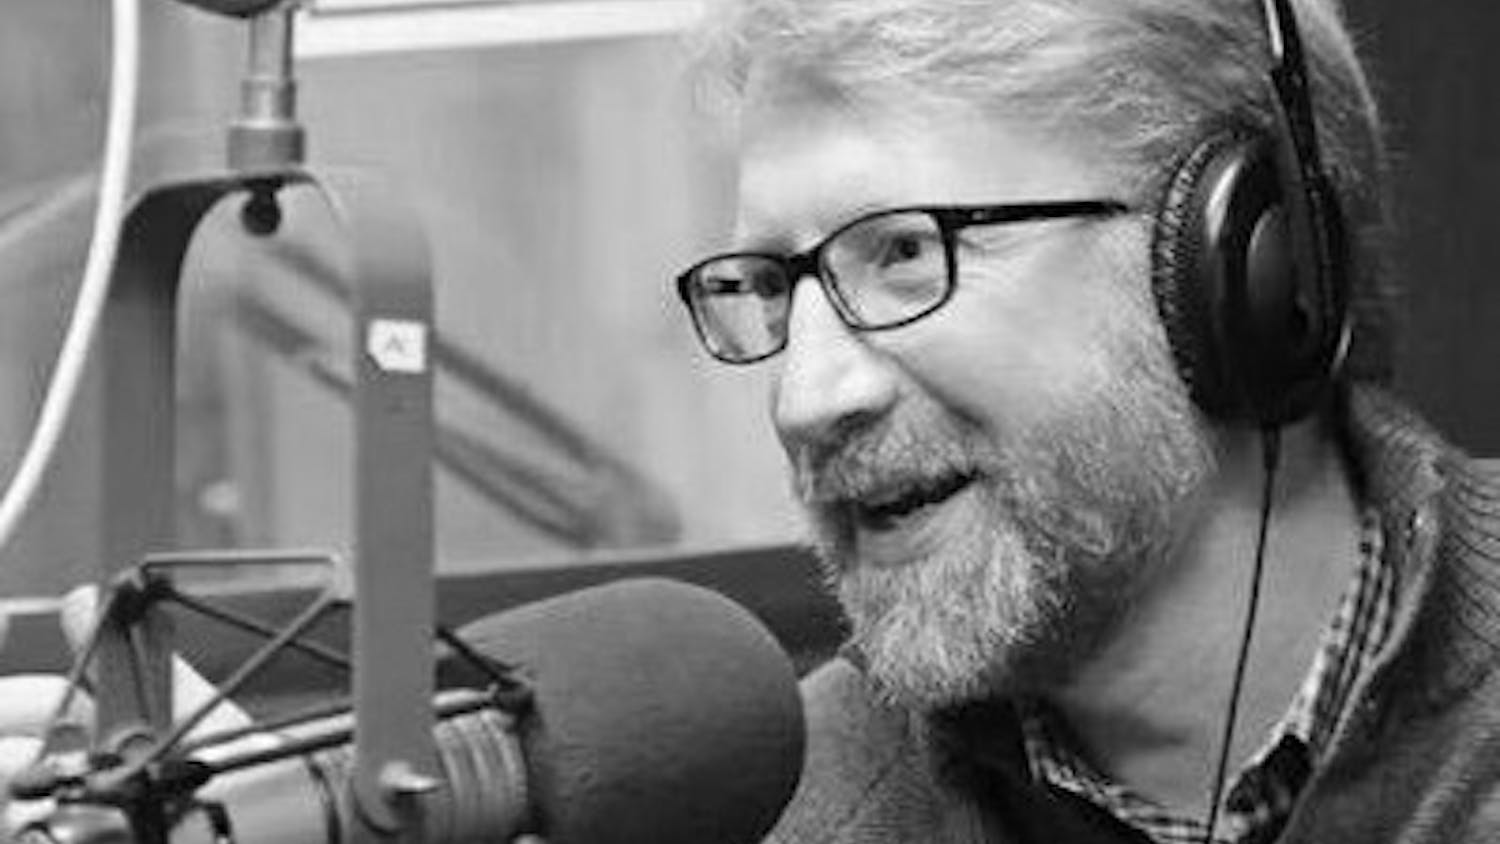 UNC research professor Brian Southwell hosts WNCU’s radio show “The Measure of Everyday Life” every Sunday night at 6:30. (Courtesy of Brian Southwell)